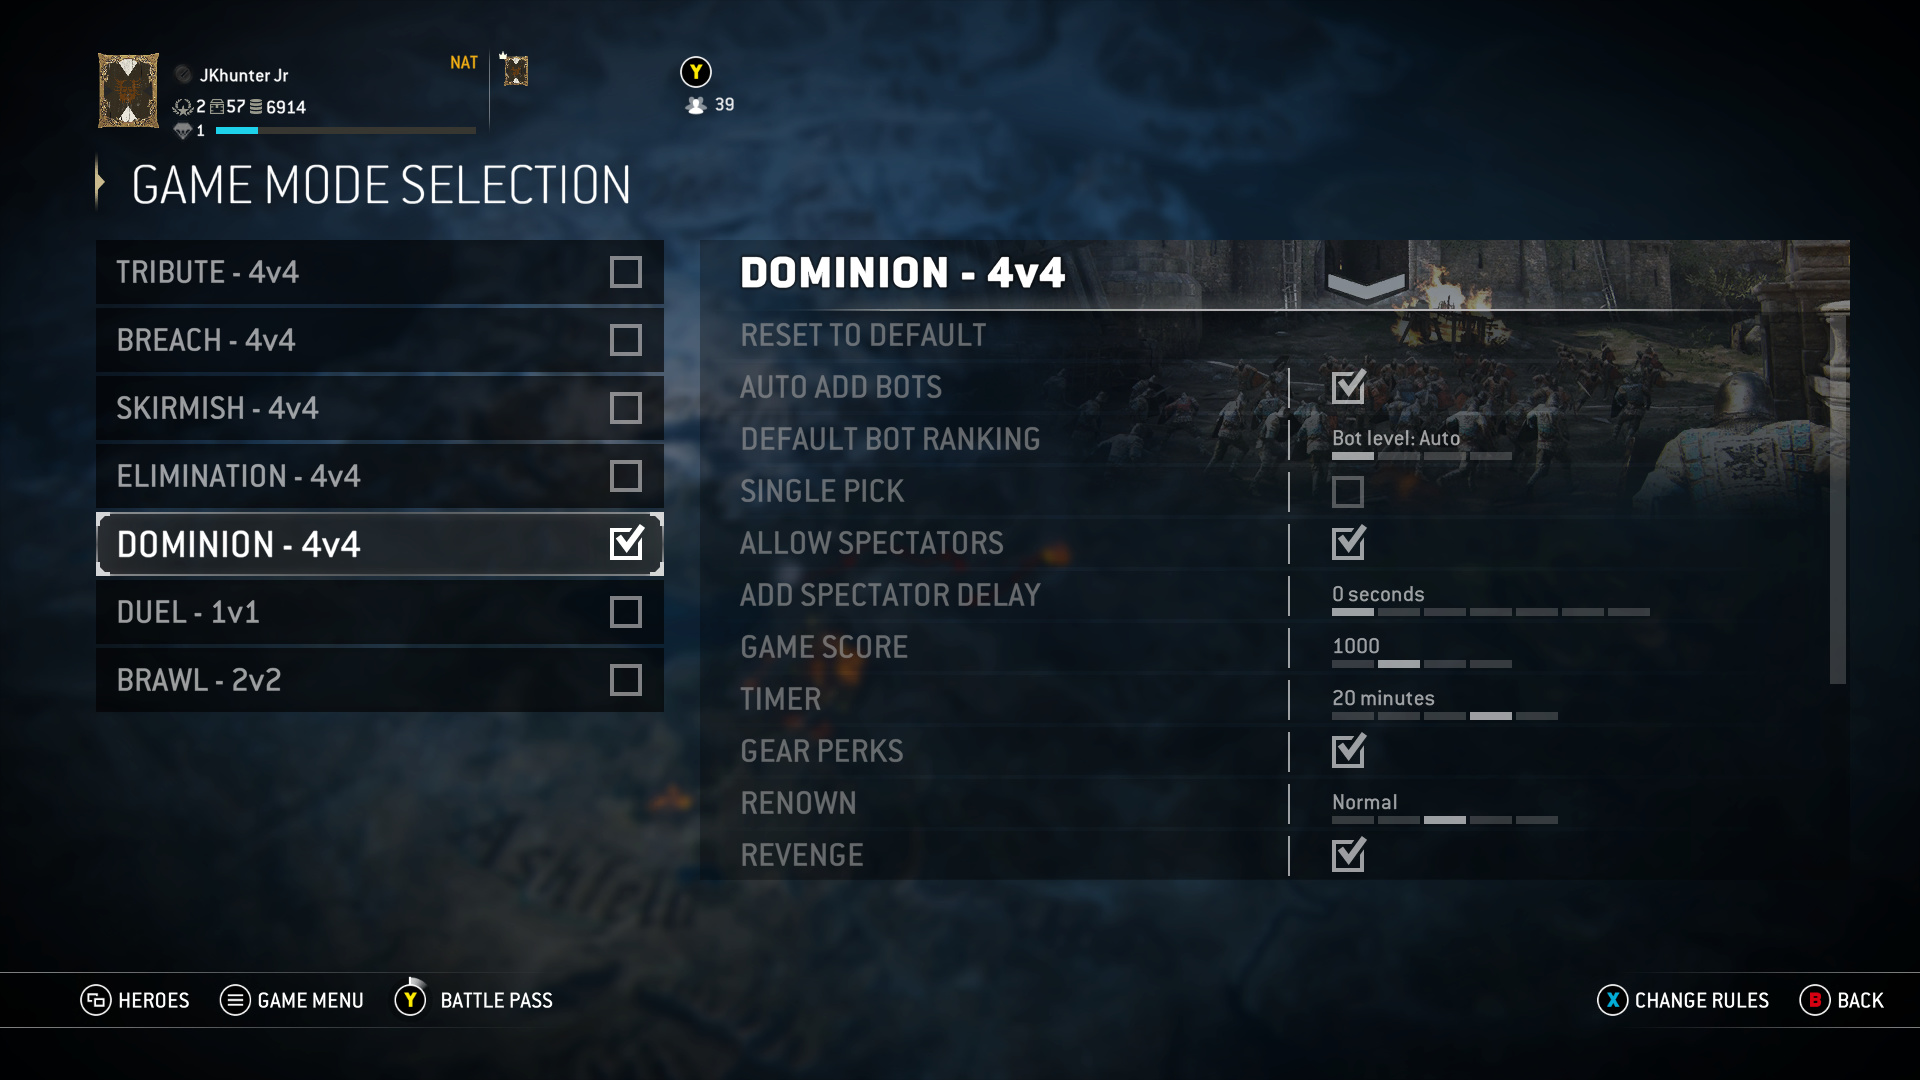 An in-game screenshot from For Honor displaying the game mode selection page of the custom match options. A selectable list of game modes is shown on the left with a detailed list of settings on the right.